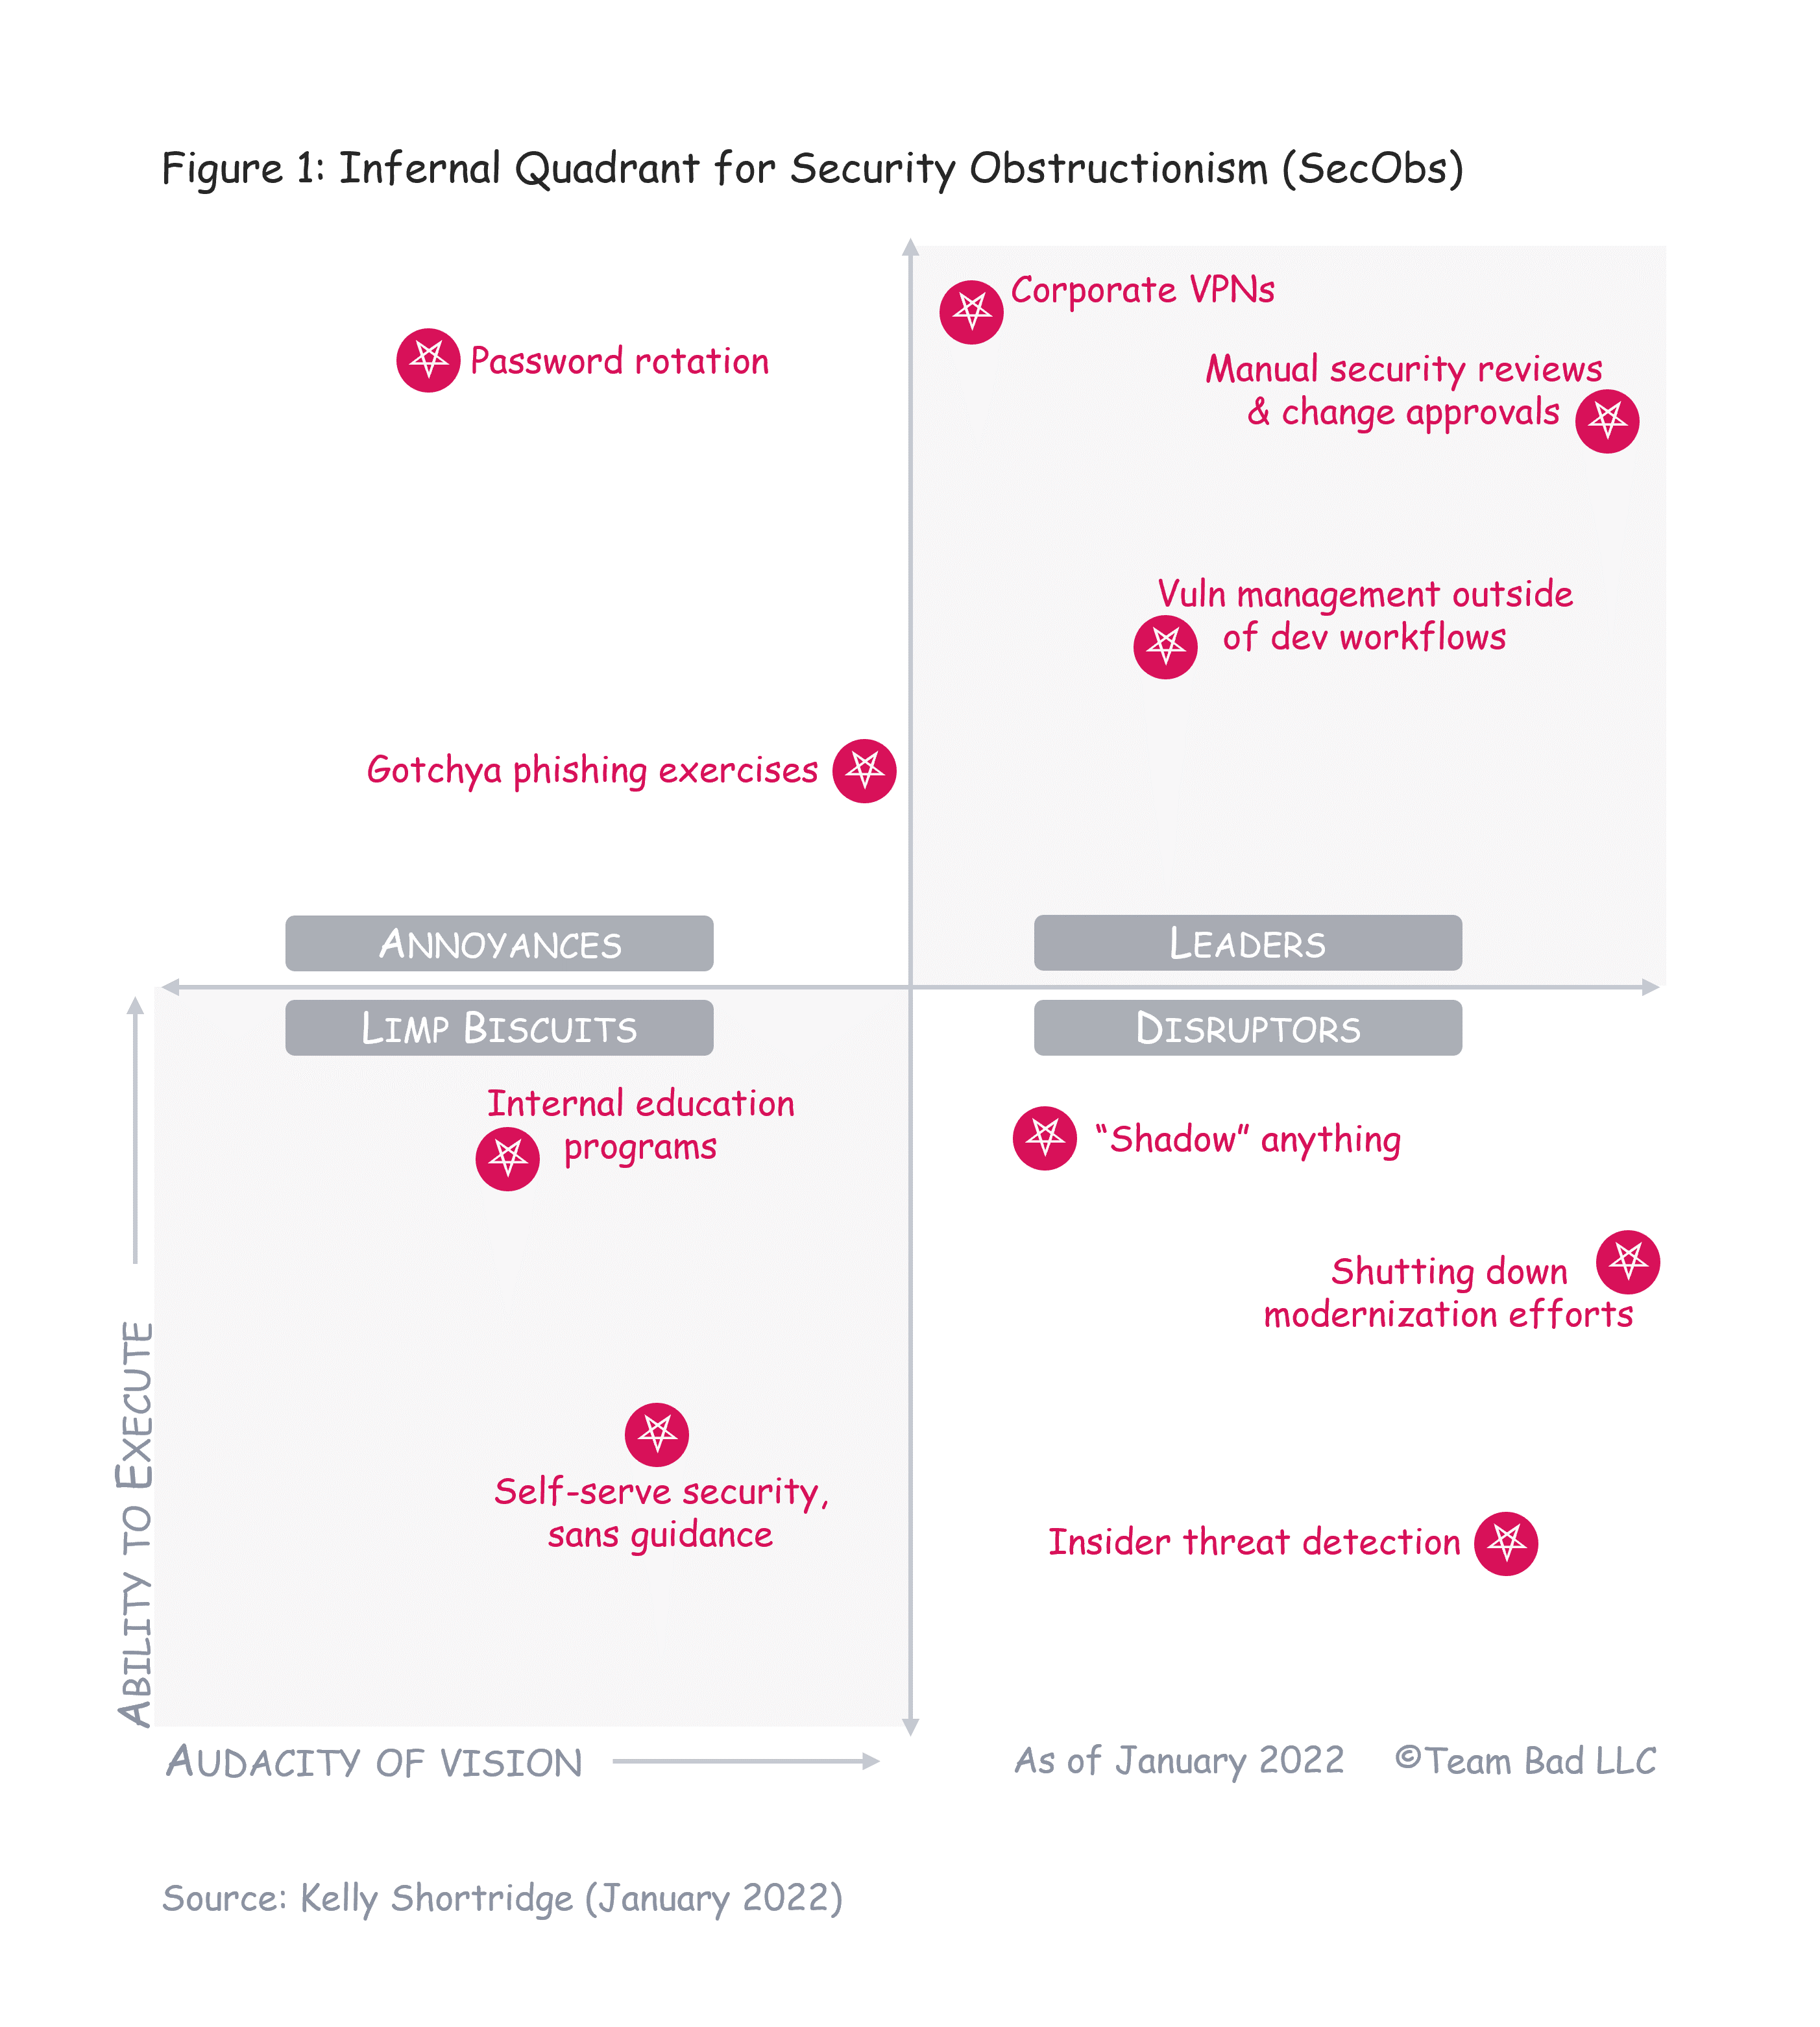 The Infernal Quadrant for Security Obstructionism